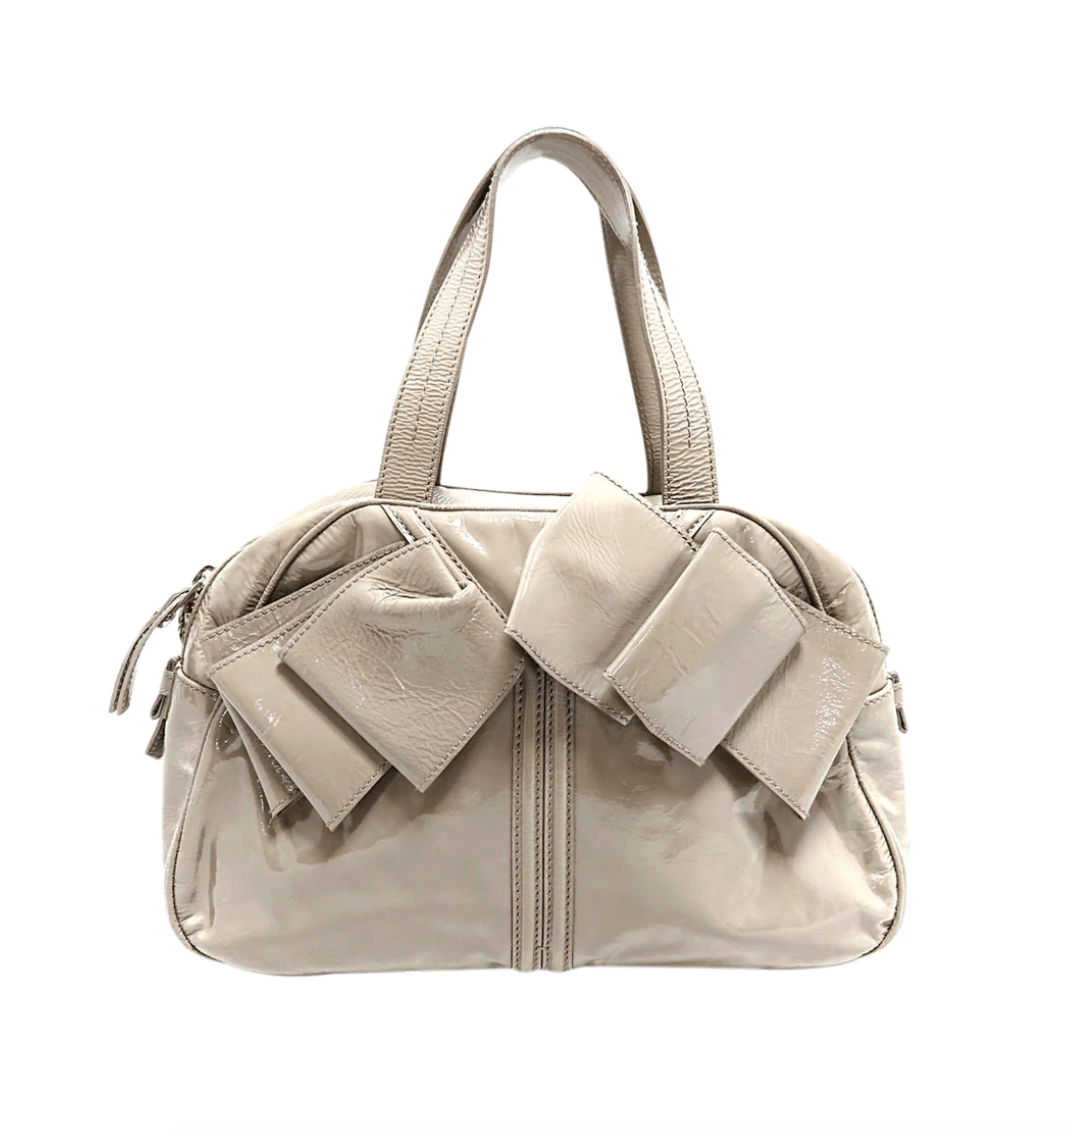 Leather Patent Bow Shoulder Tote Bag - Endless